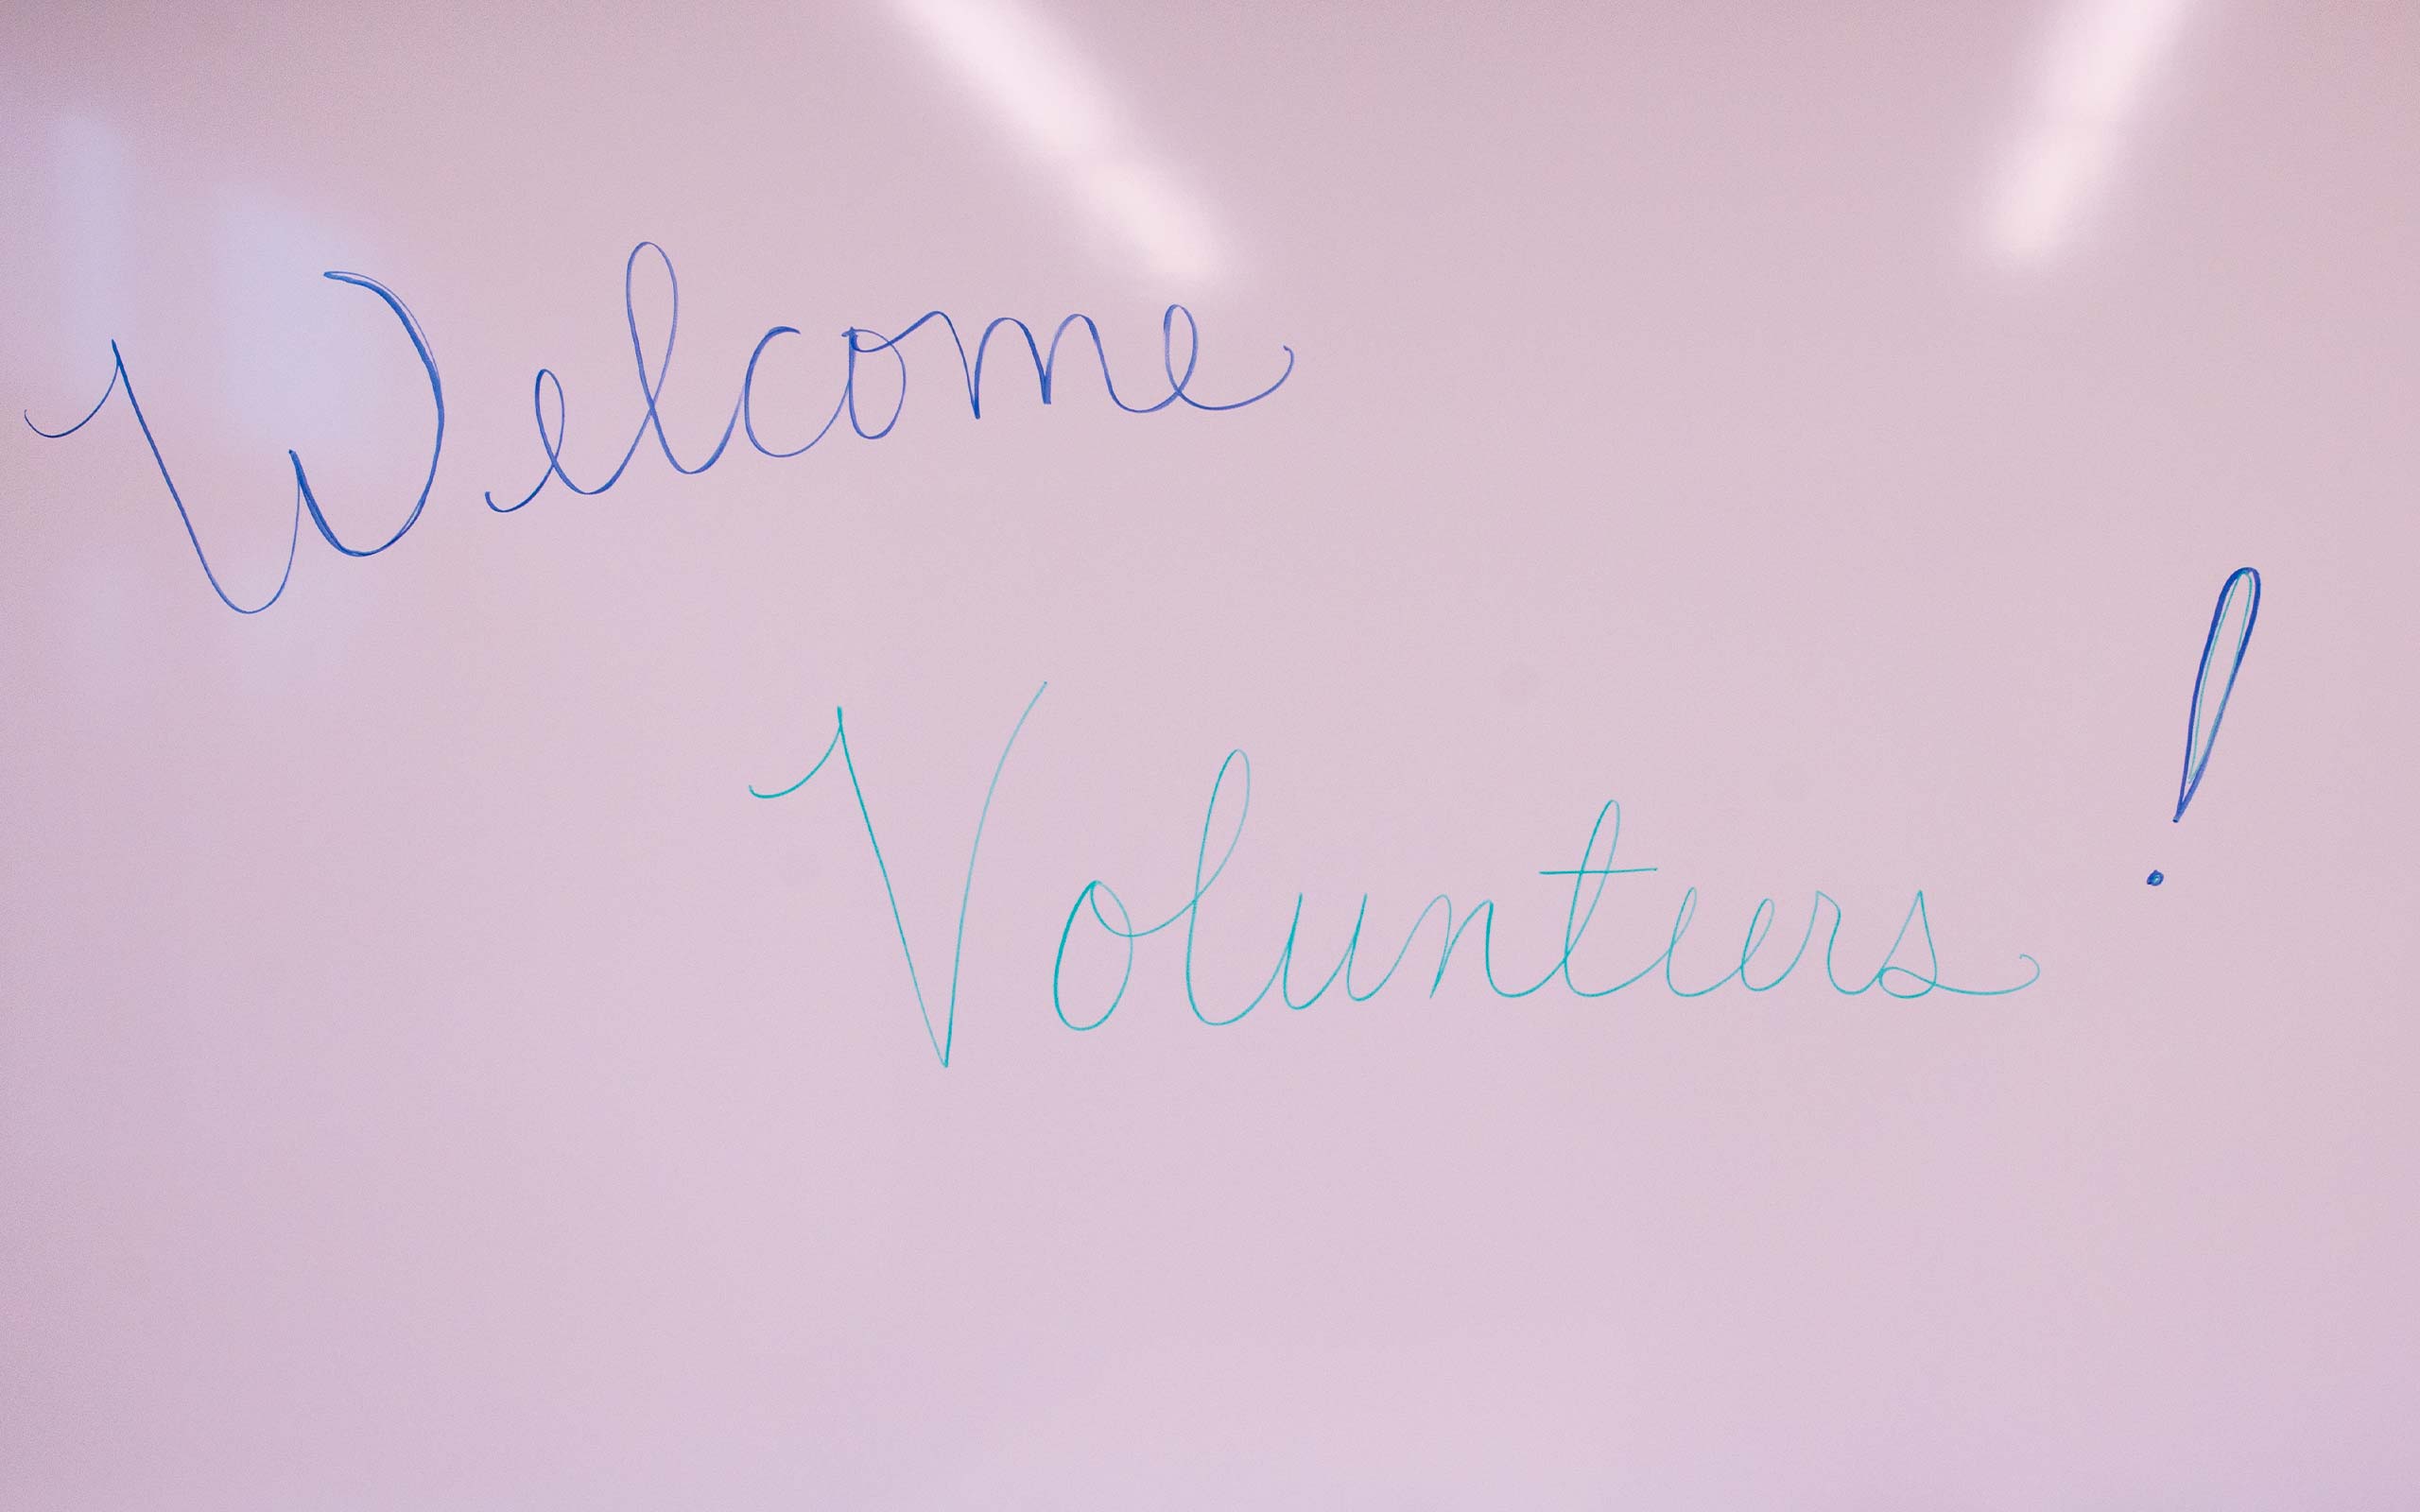 A whiteboard that says "Welcome, Volunteers"